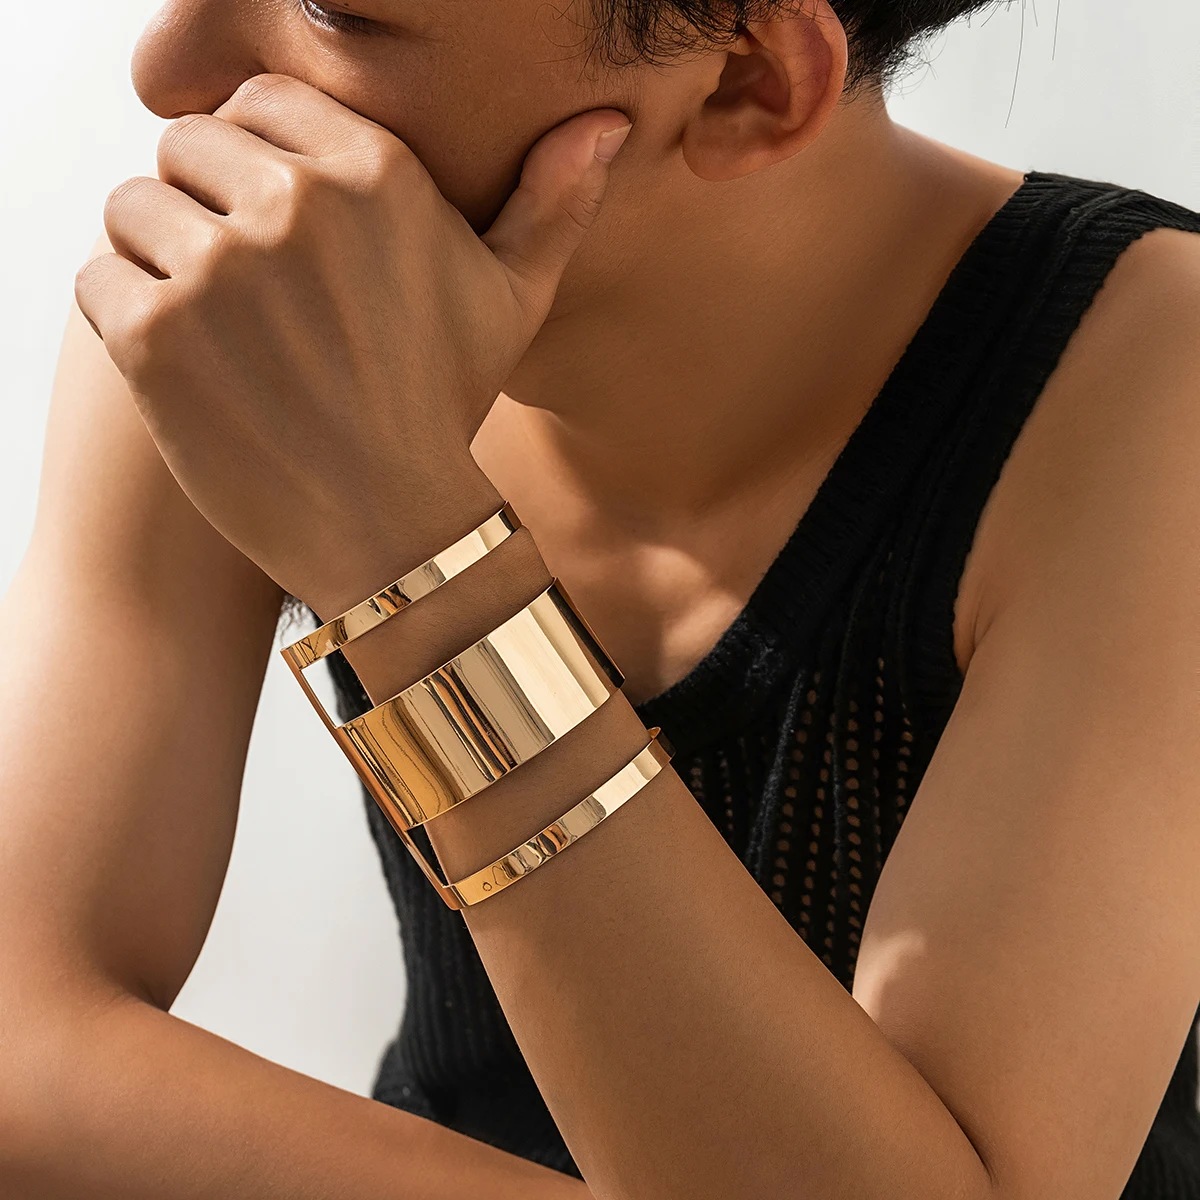 Men's jewellery: bracelets and accessories for him | Nomination